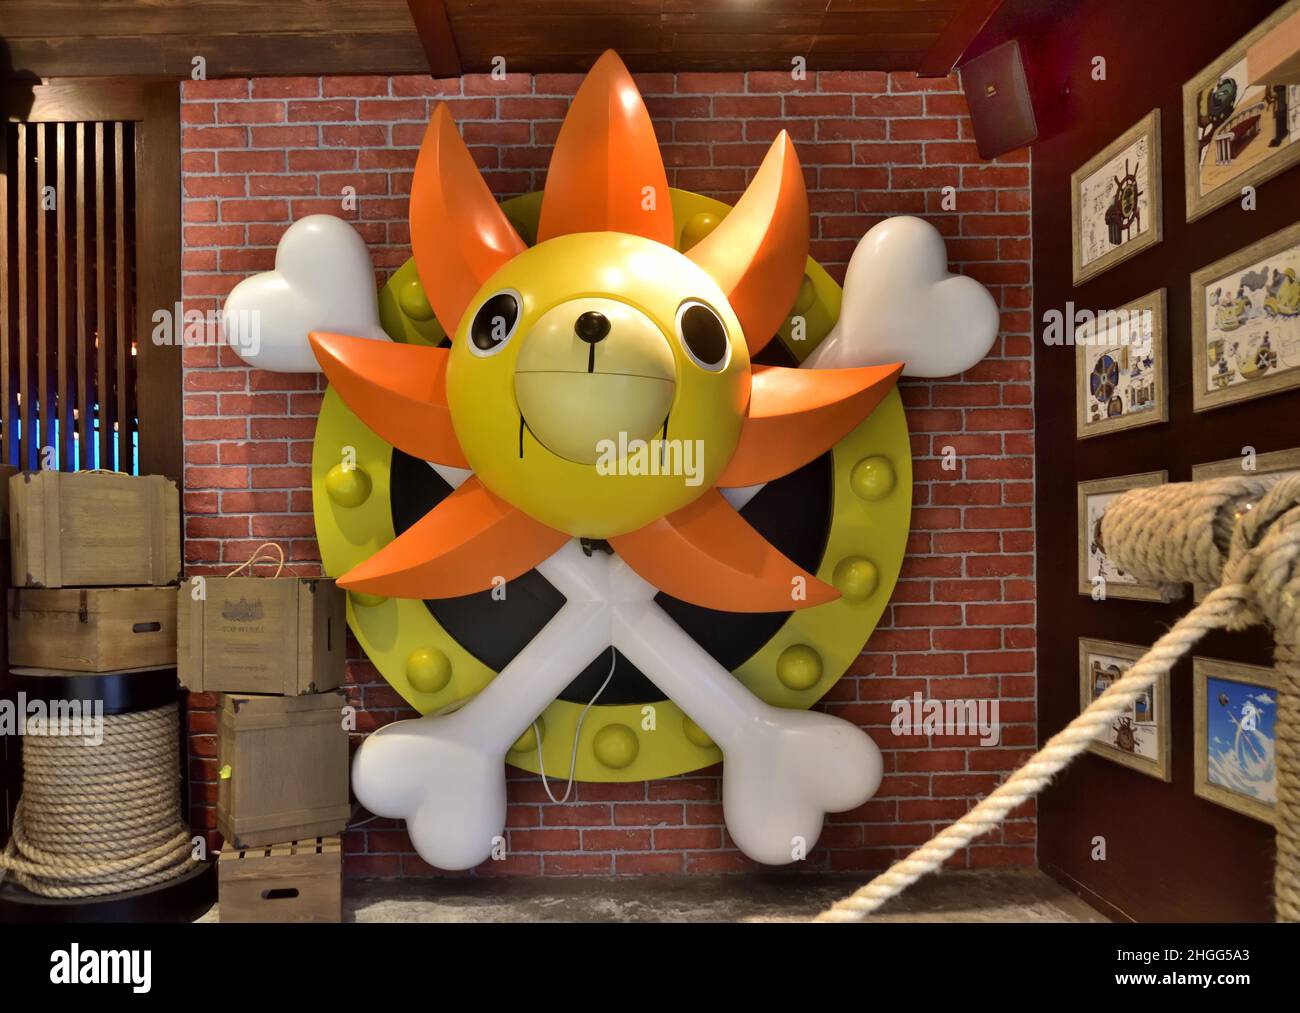 Thousand Sunny logo of One Piece mounted on wall Stock Photo